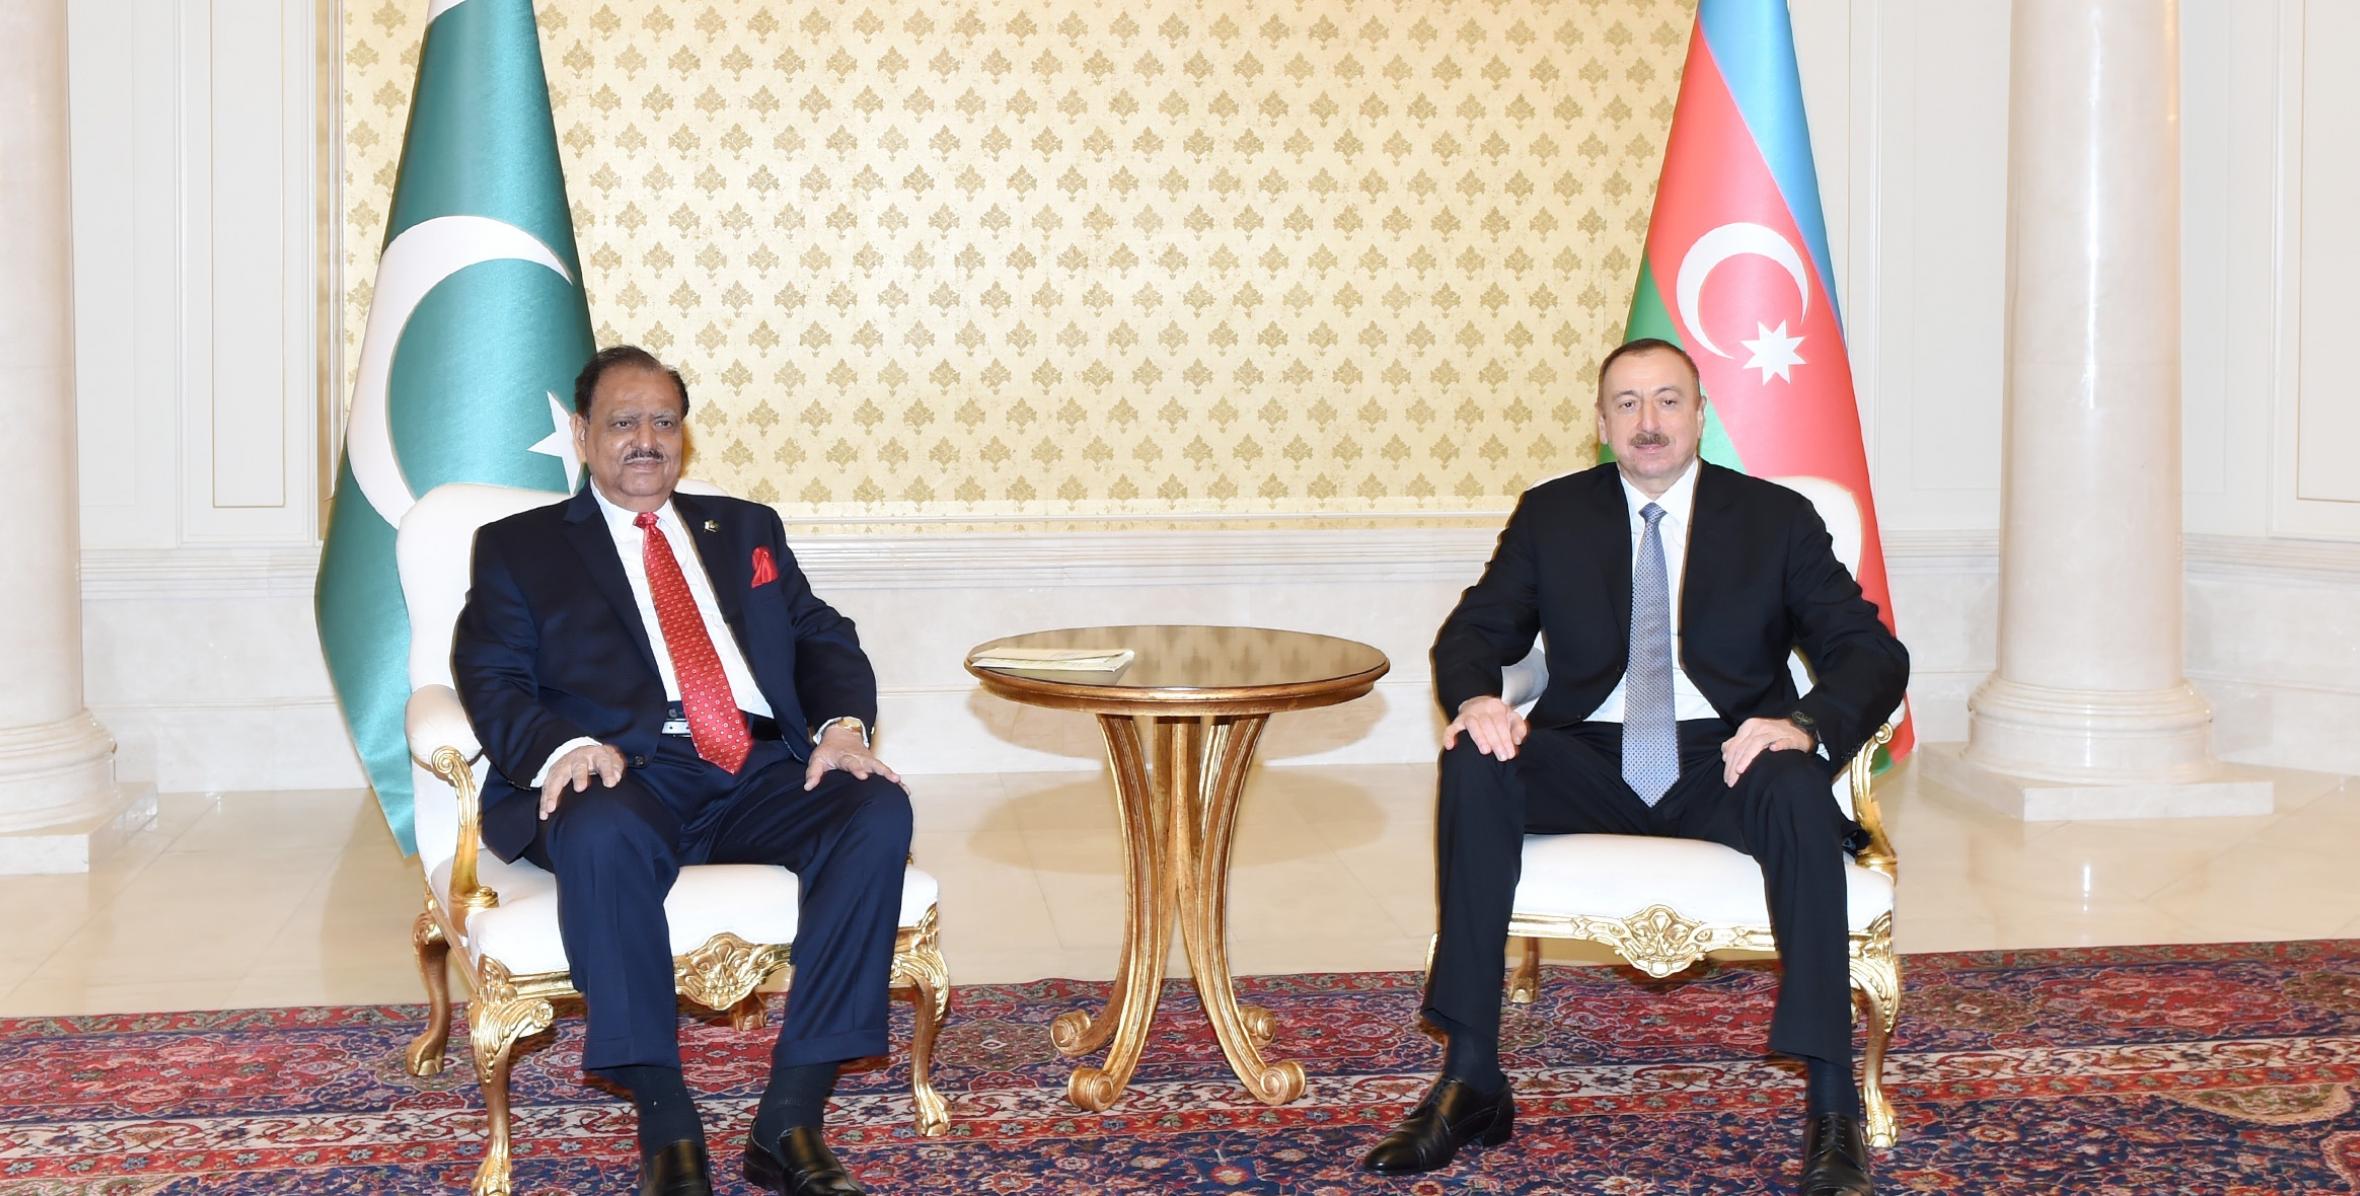 Ilham Aliyev and President of Pakistan Mamnoon Hussain held a one-on-one meeting